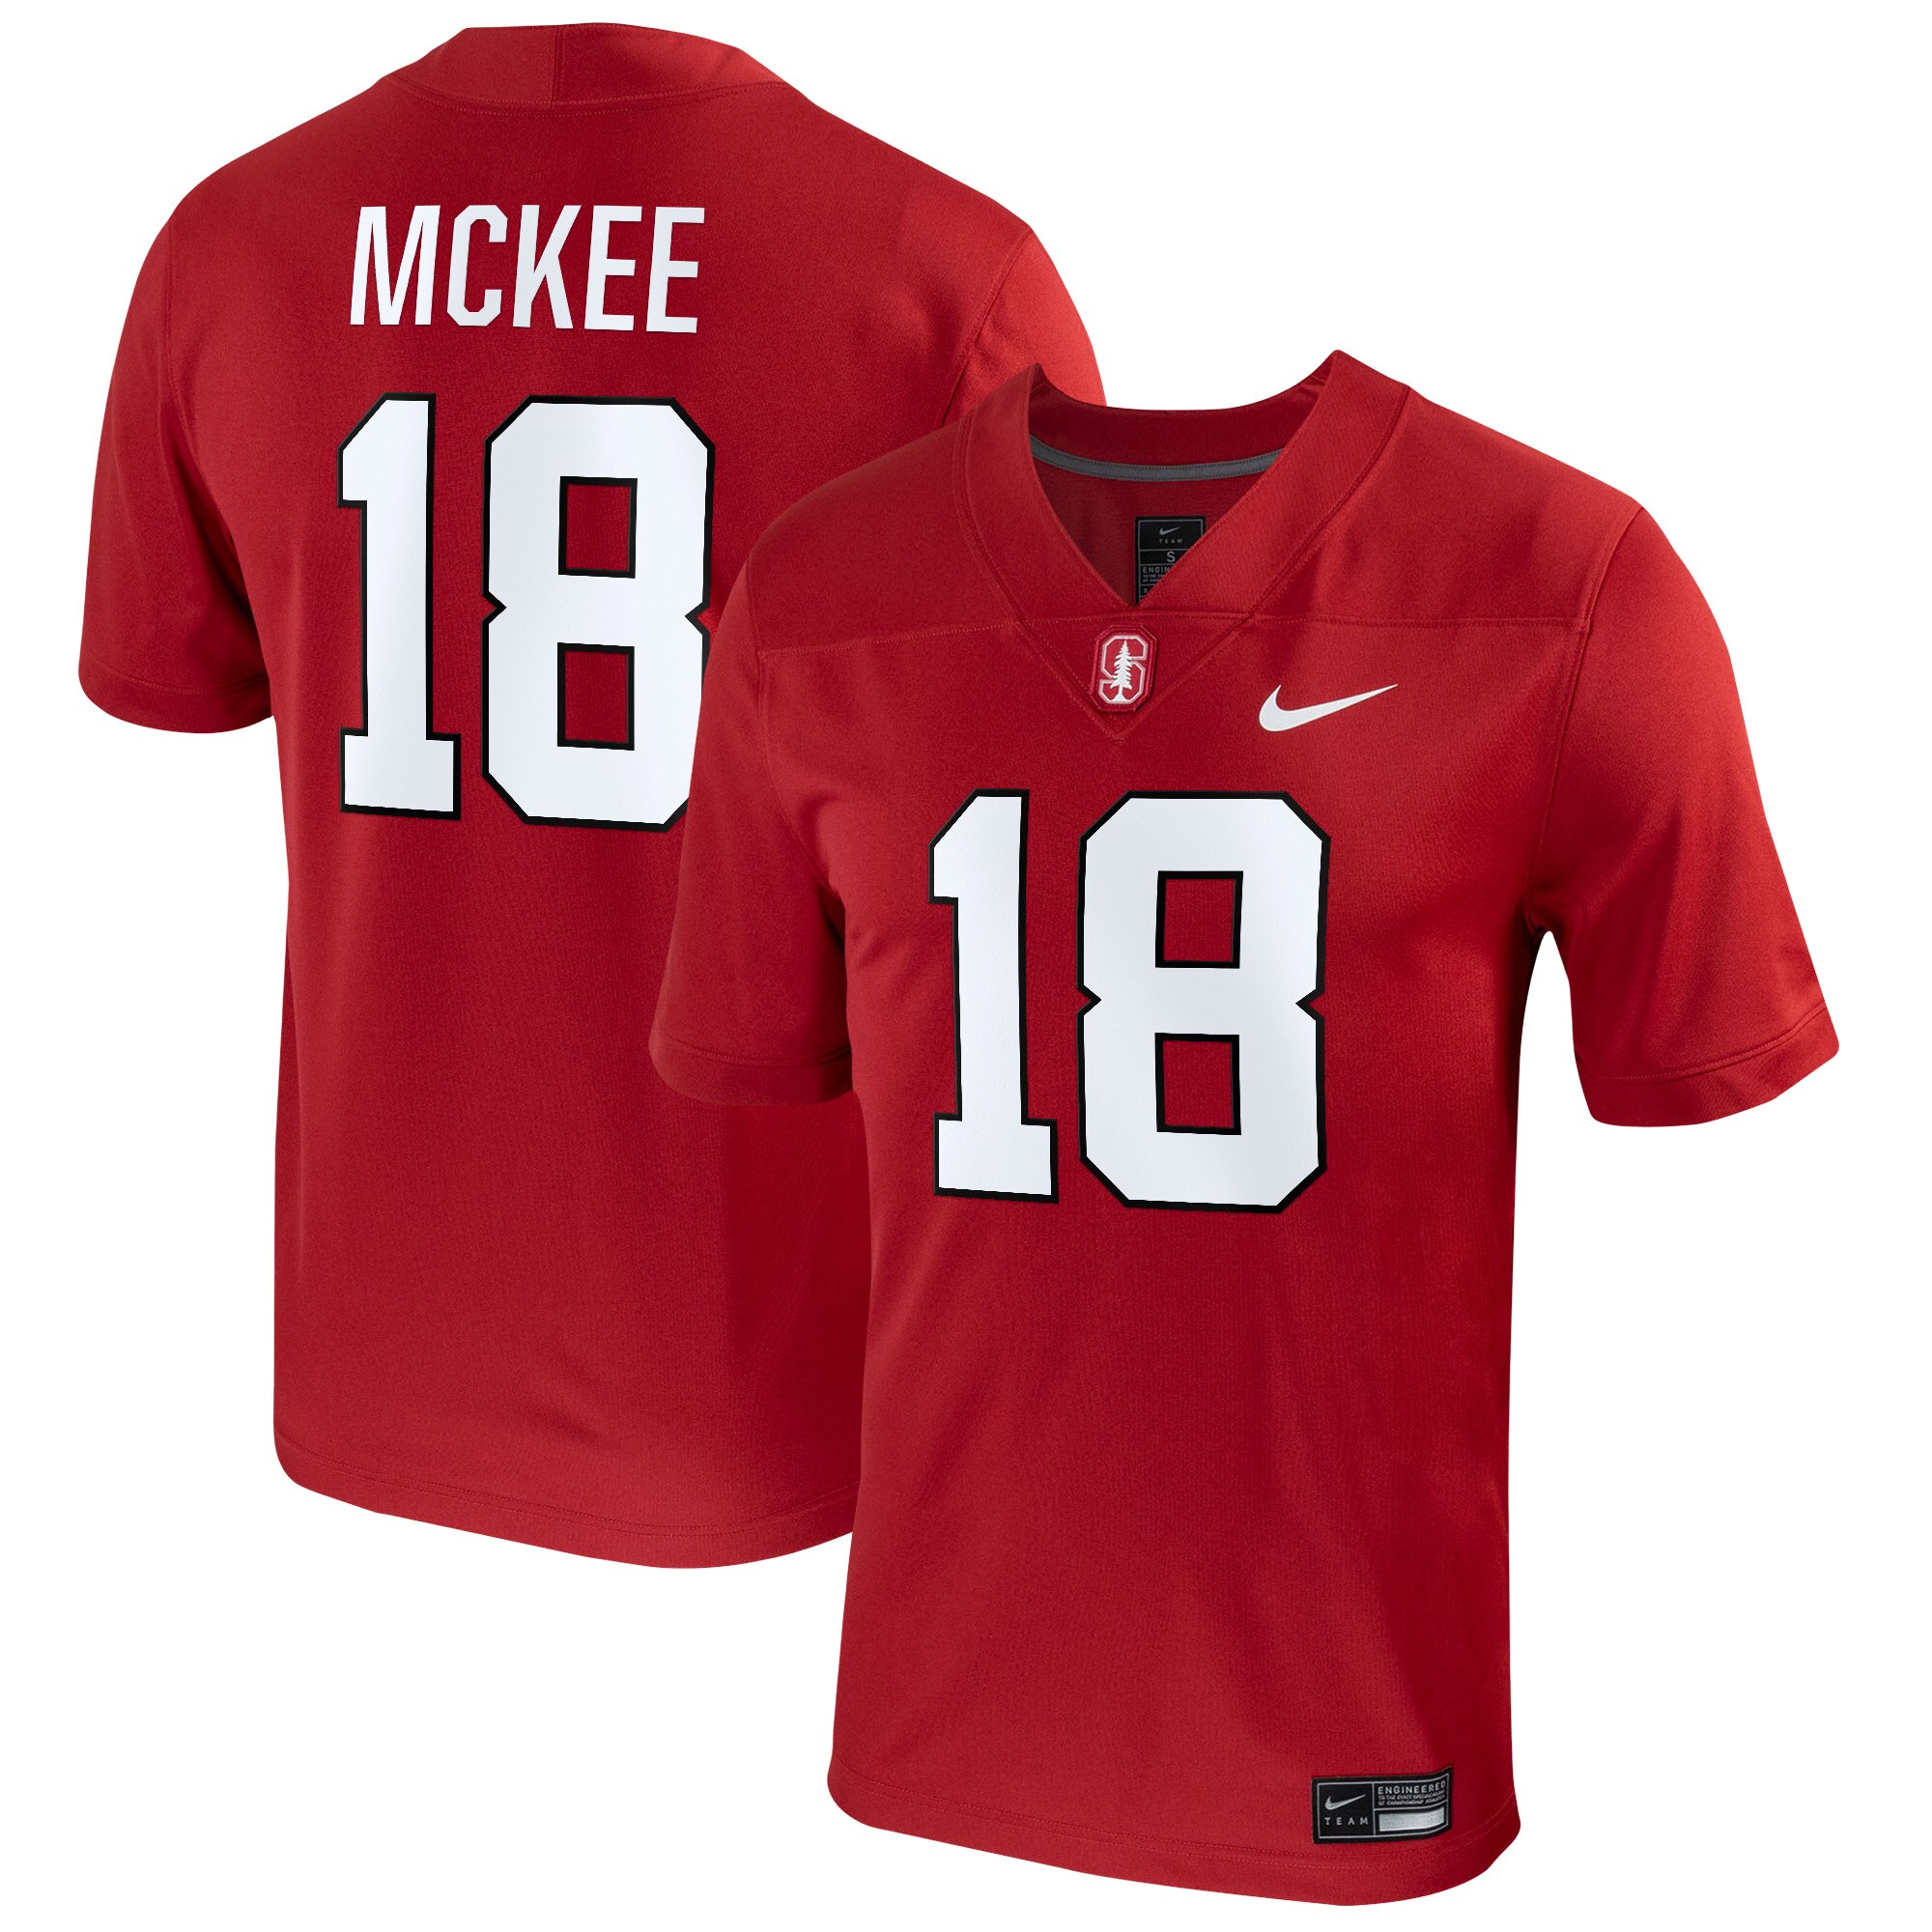 Tanner Mckee Stanford Cardinal Nil Replica  Football Shirts Jersey - Crimson For Youth Women Men